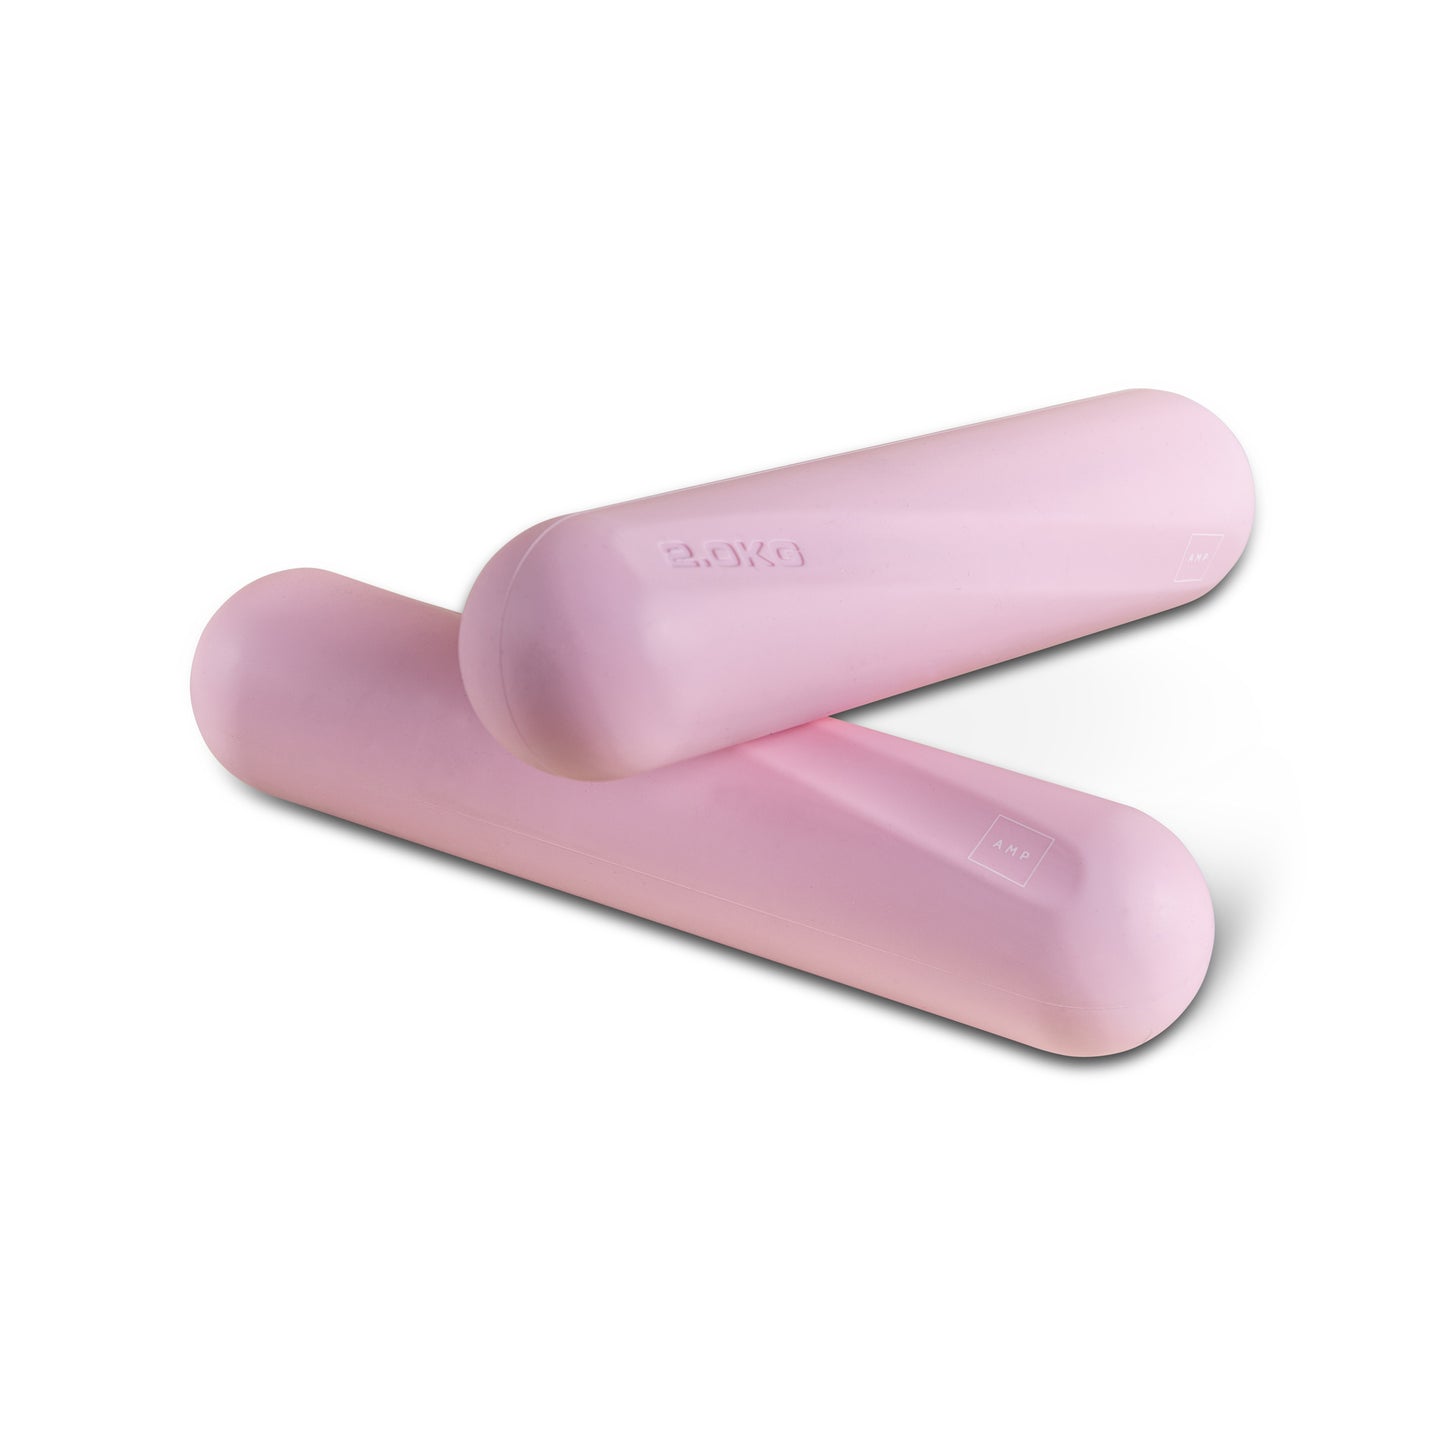 Dumbbell Strength bars -  4kg pair weights pink